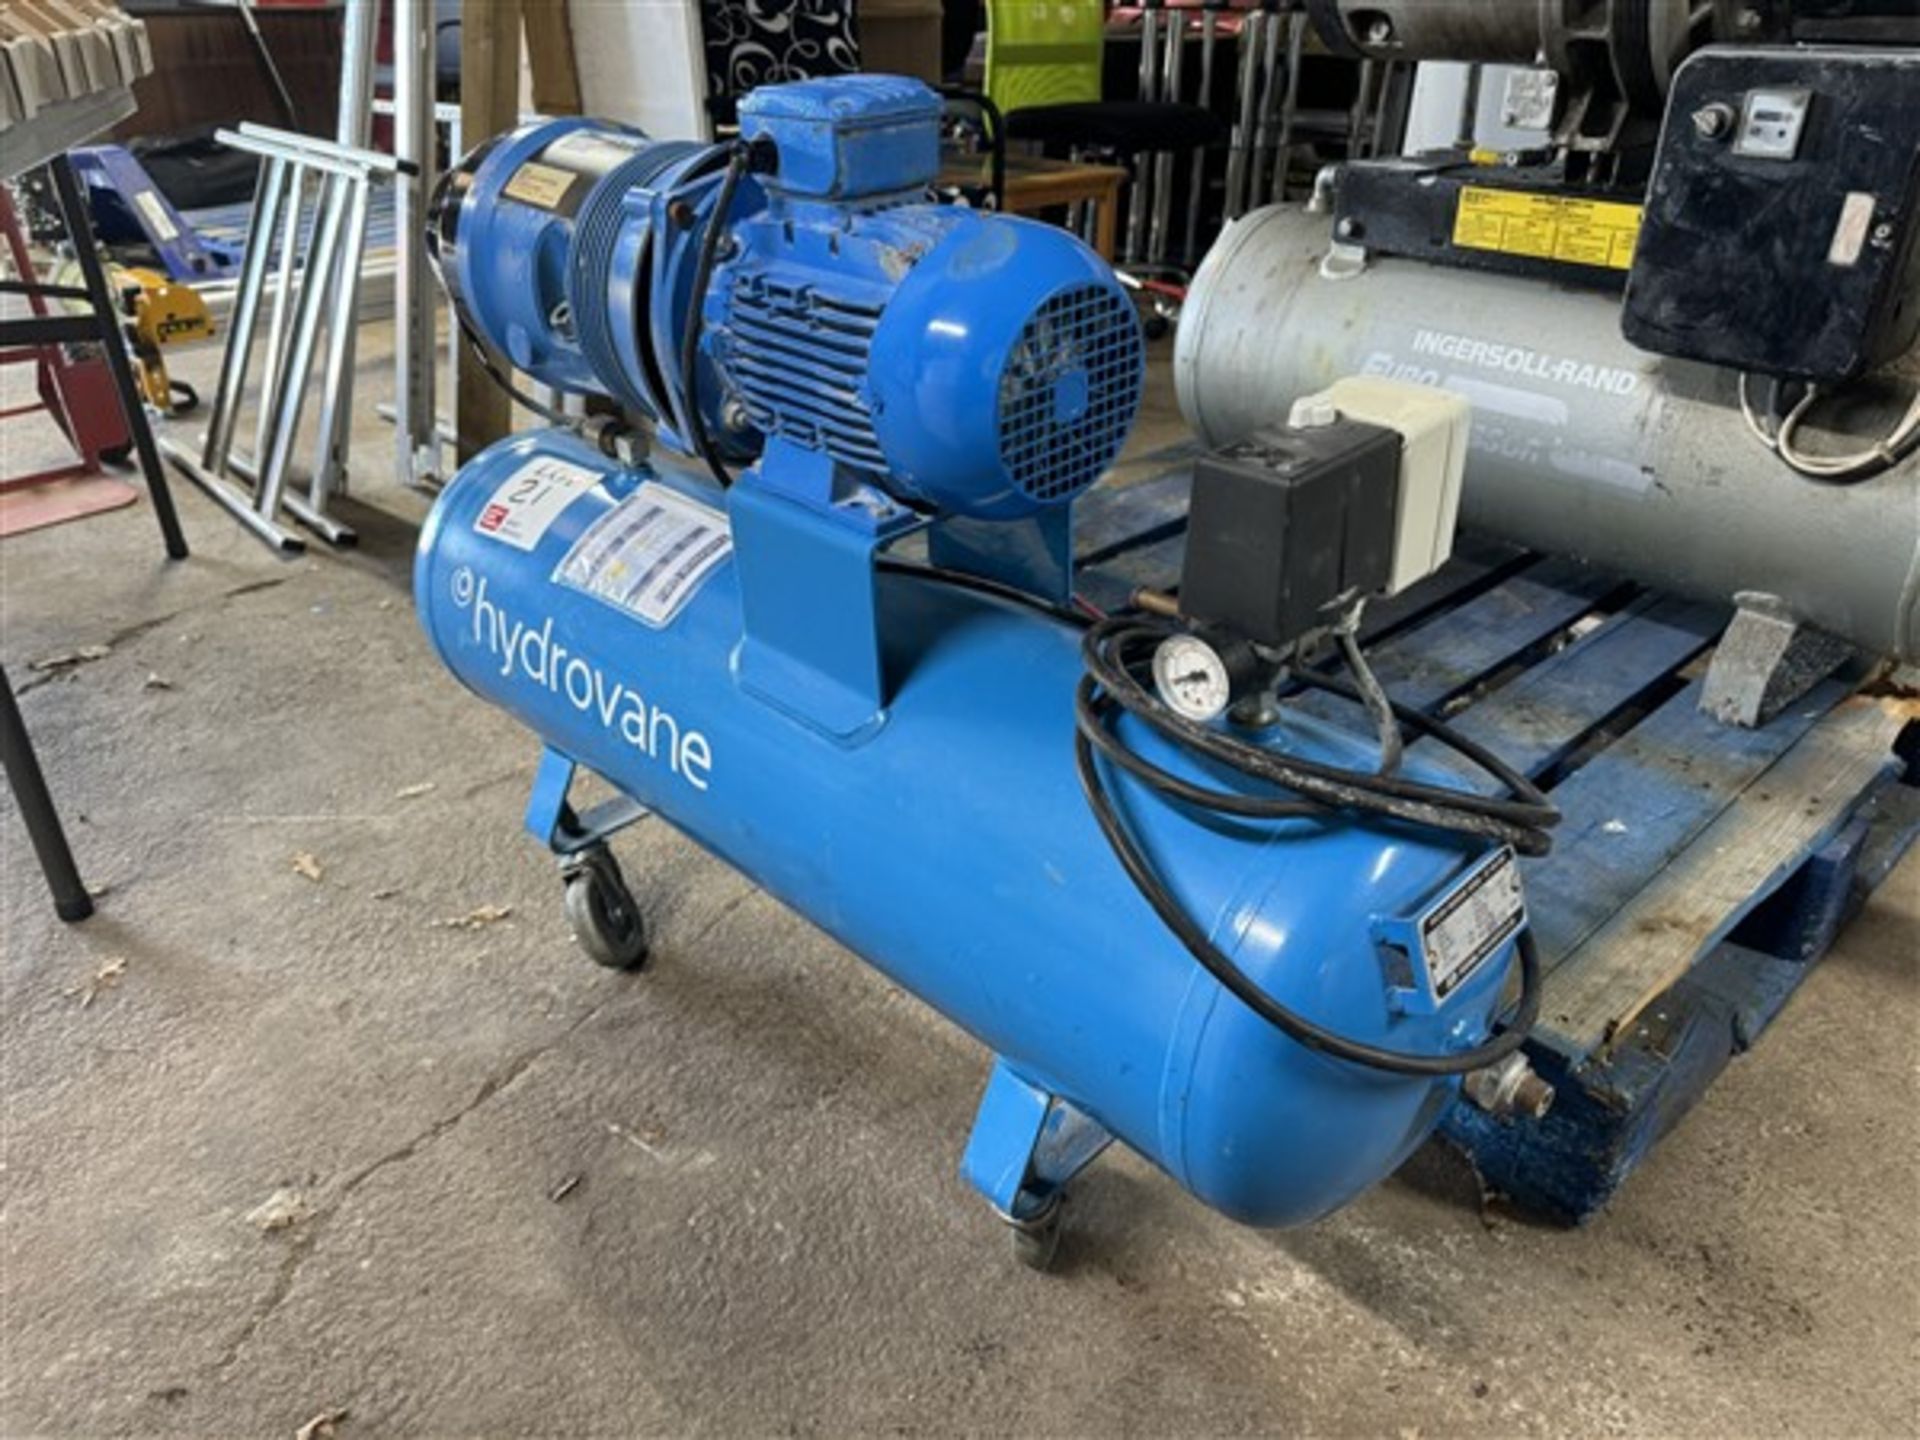 Hydrovane 75L air compressor, code 87/404 EEC, year 2008, serial no. 52004/028, (2.2KW) (Please - Image 5 of 10